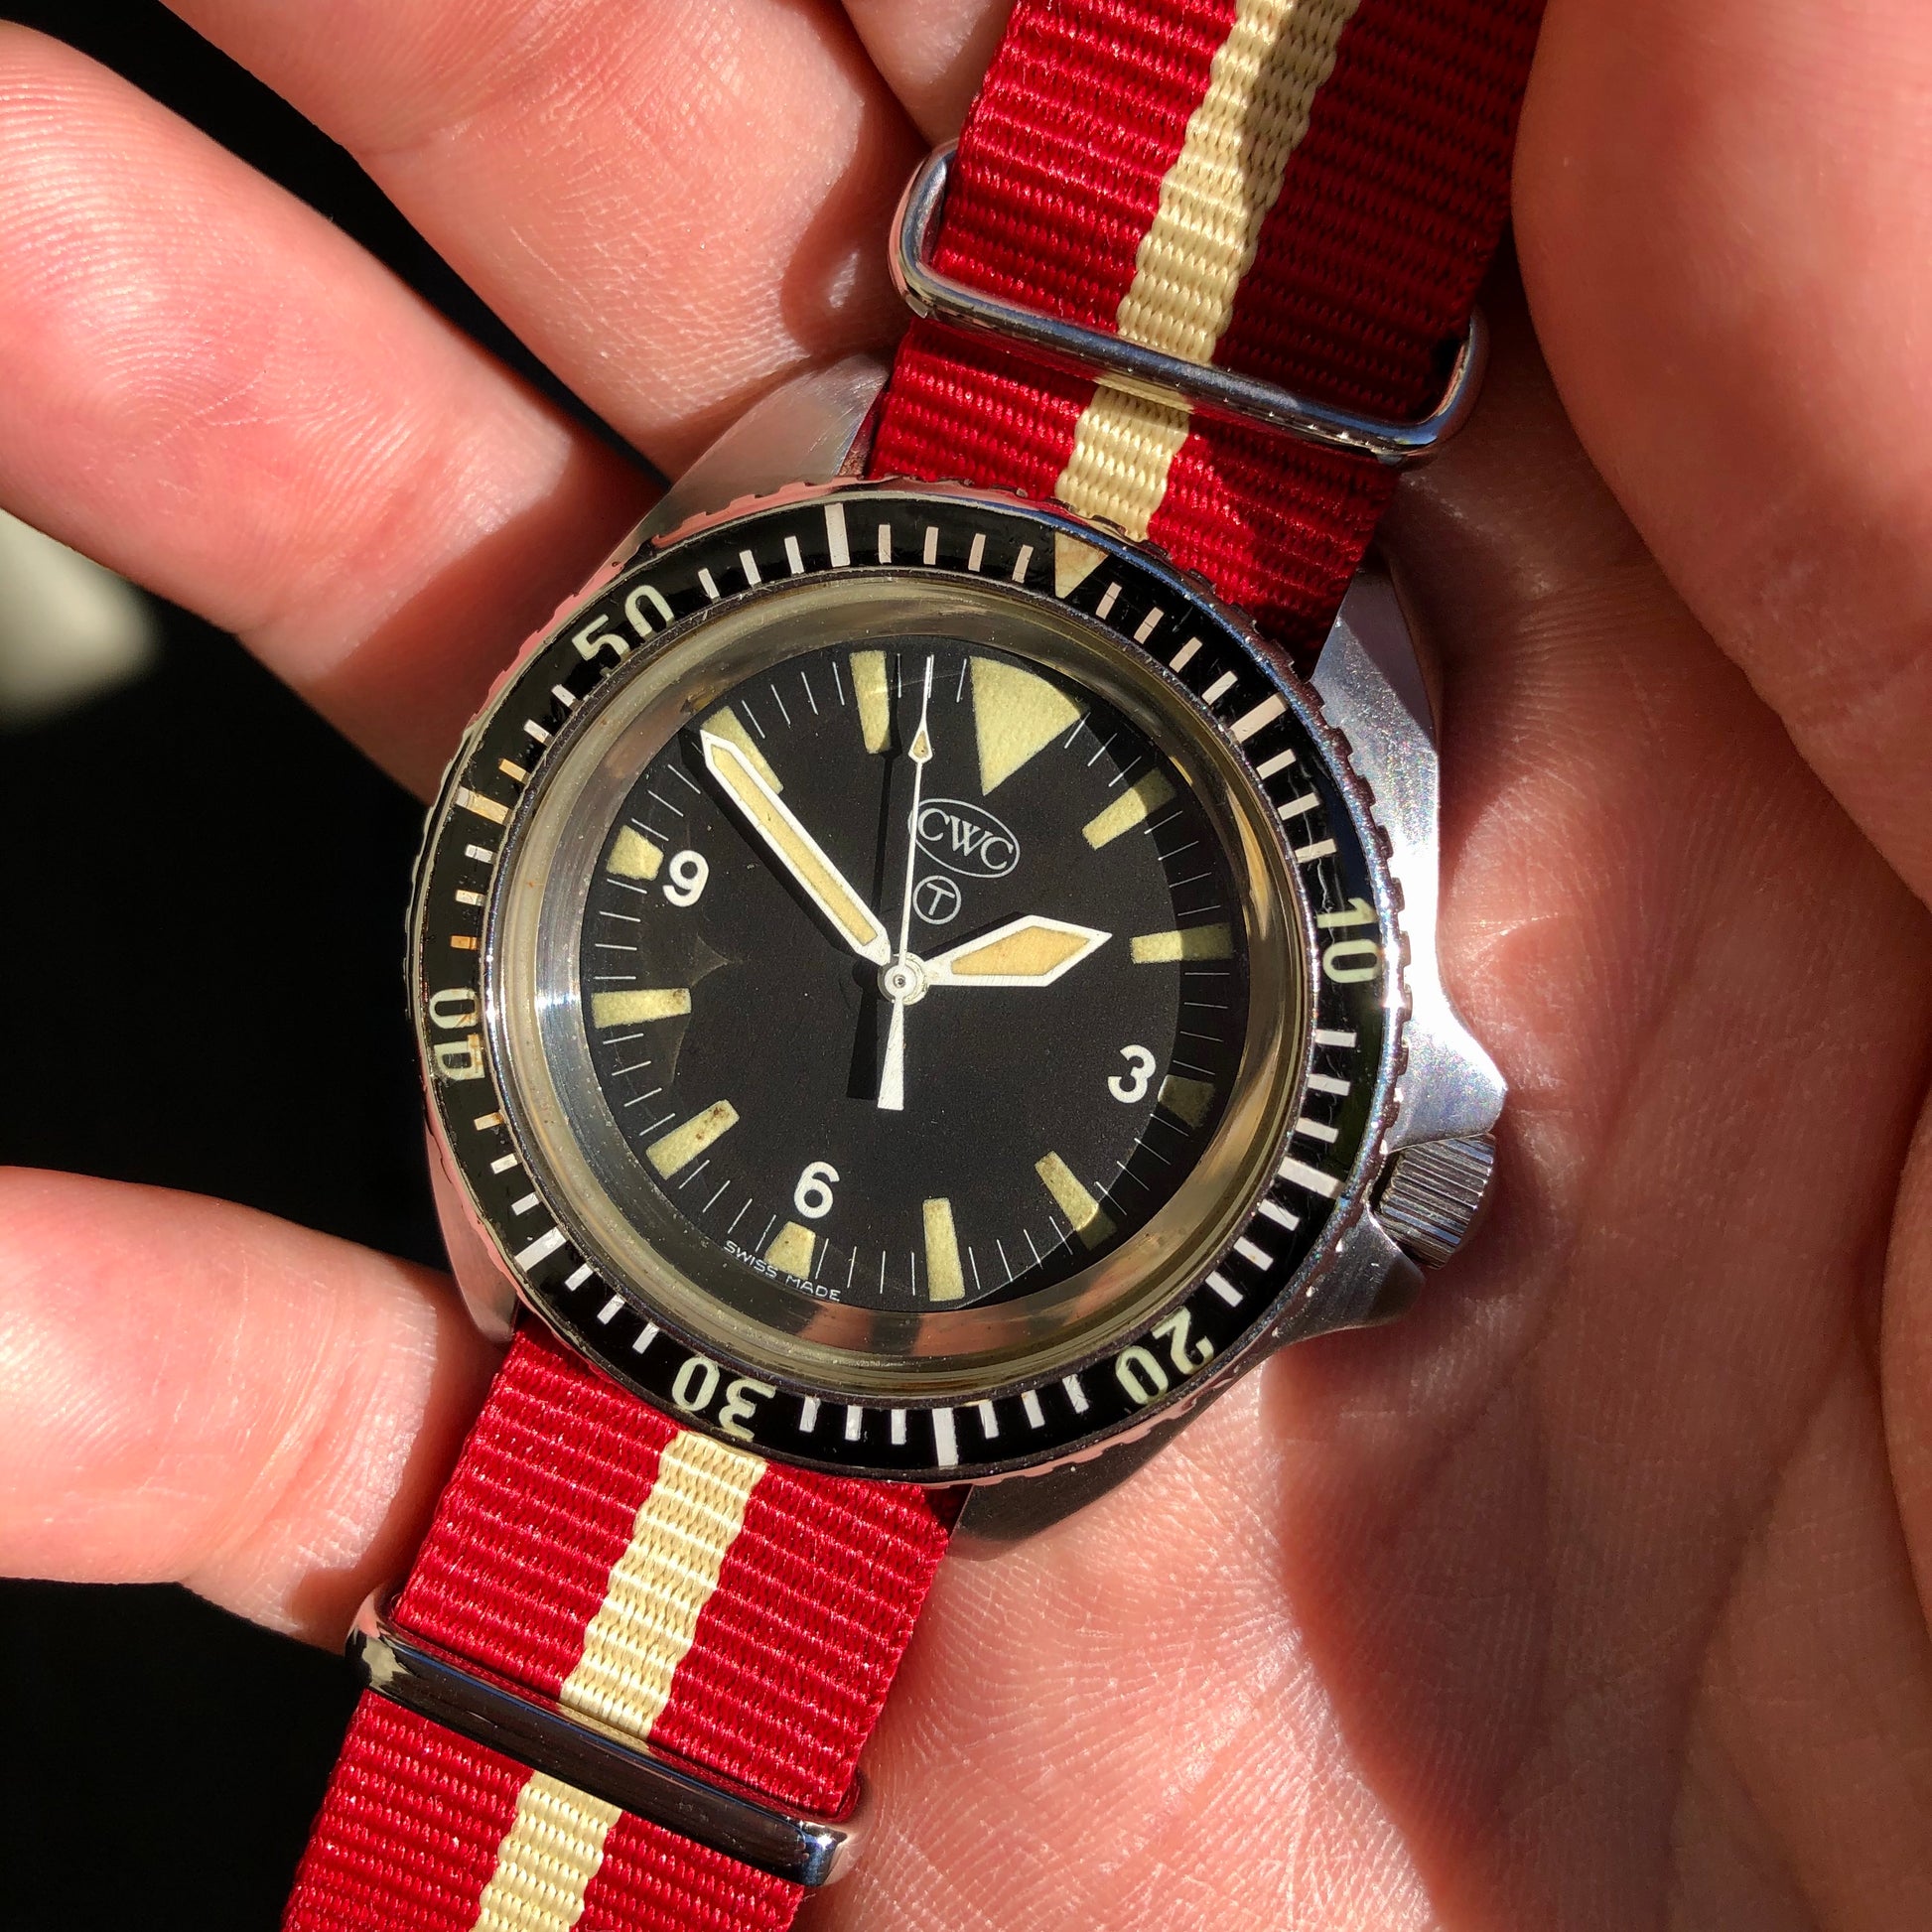 Vintage CWC Cabot Watch Company Milsub Divers Automatic 0977.165 Wristwatch Circa 1982 - Hashtag Watch Company